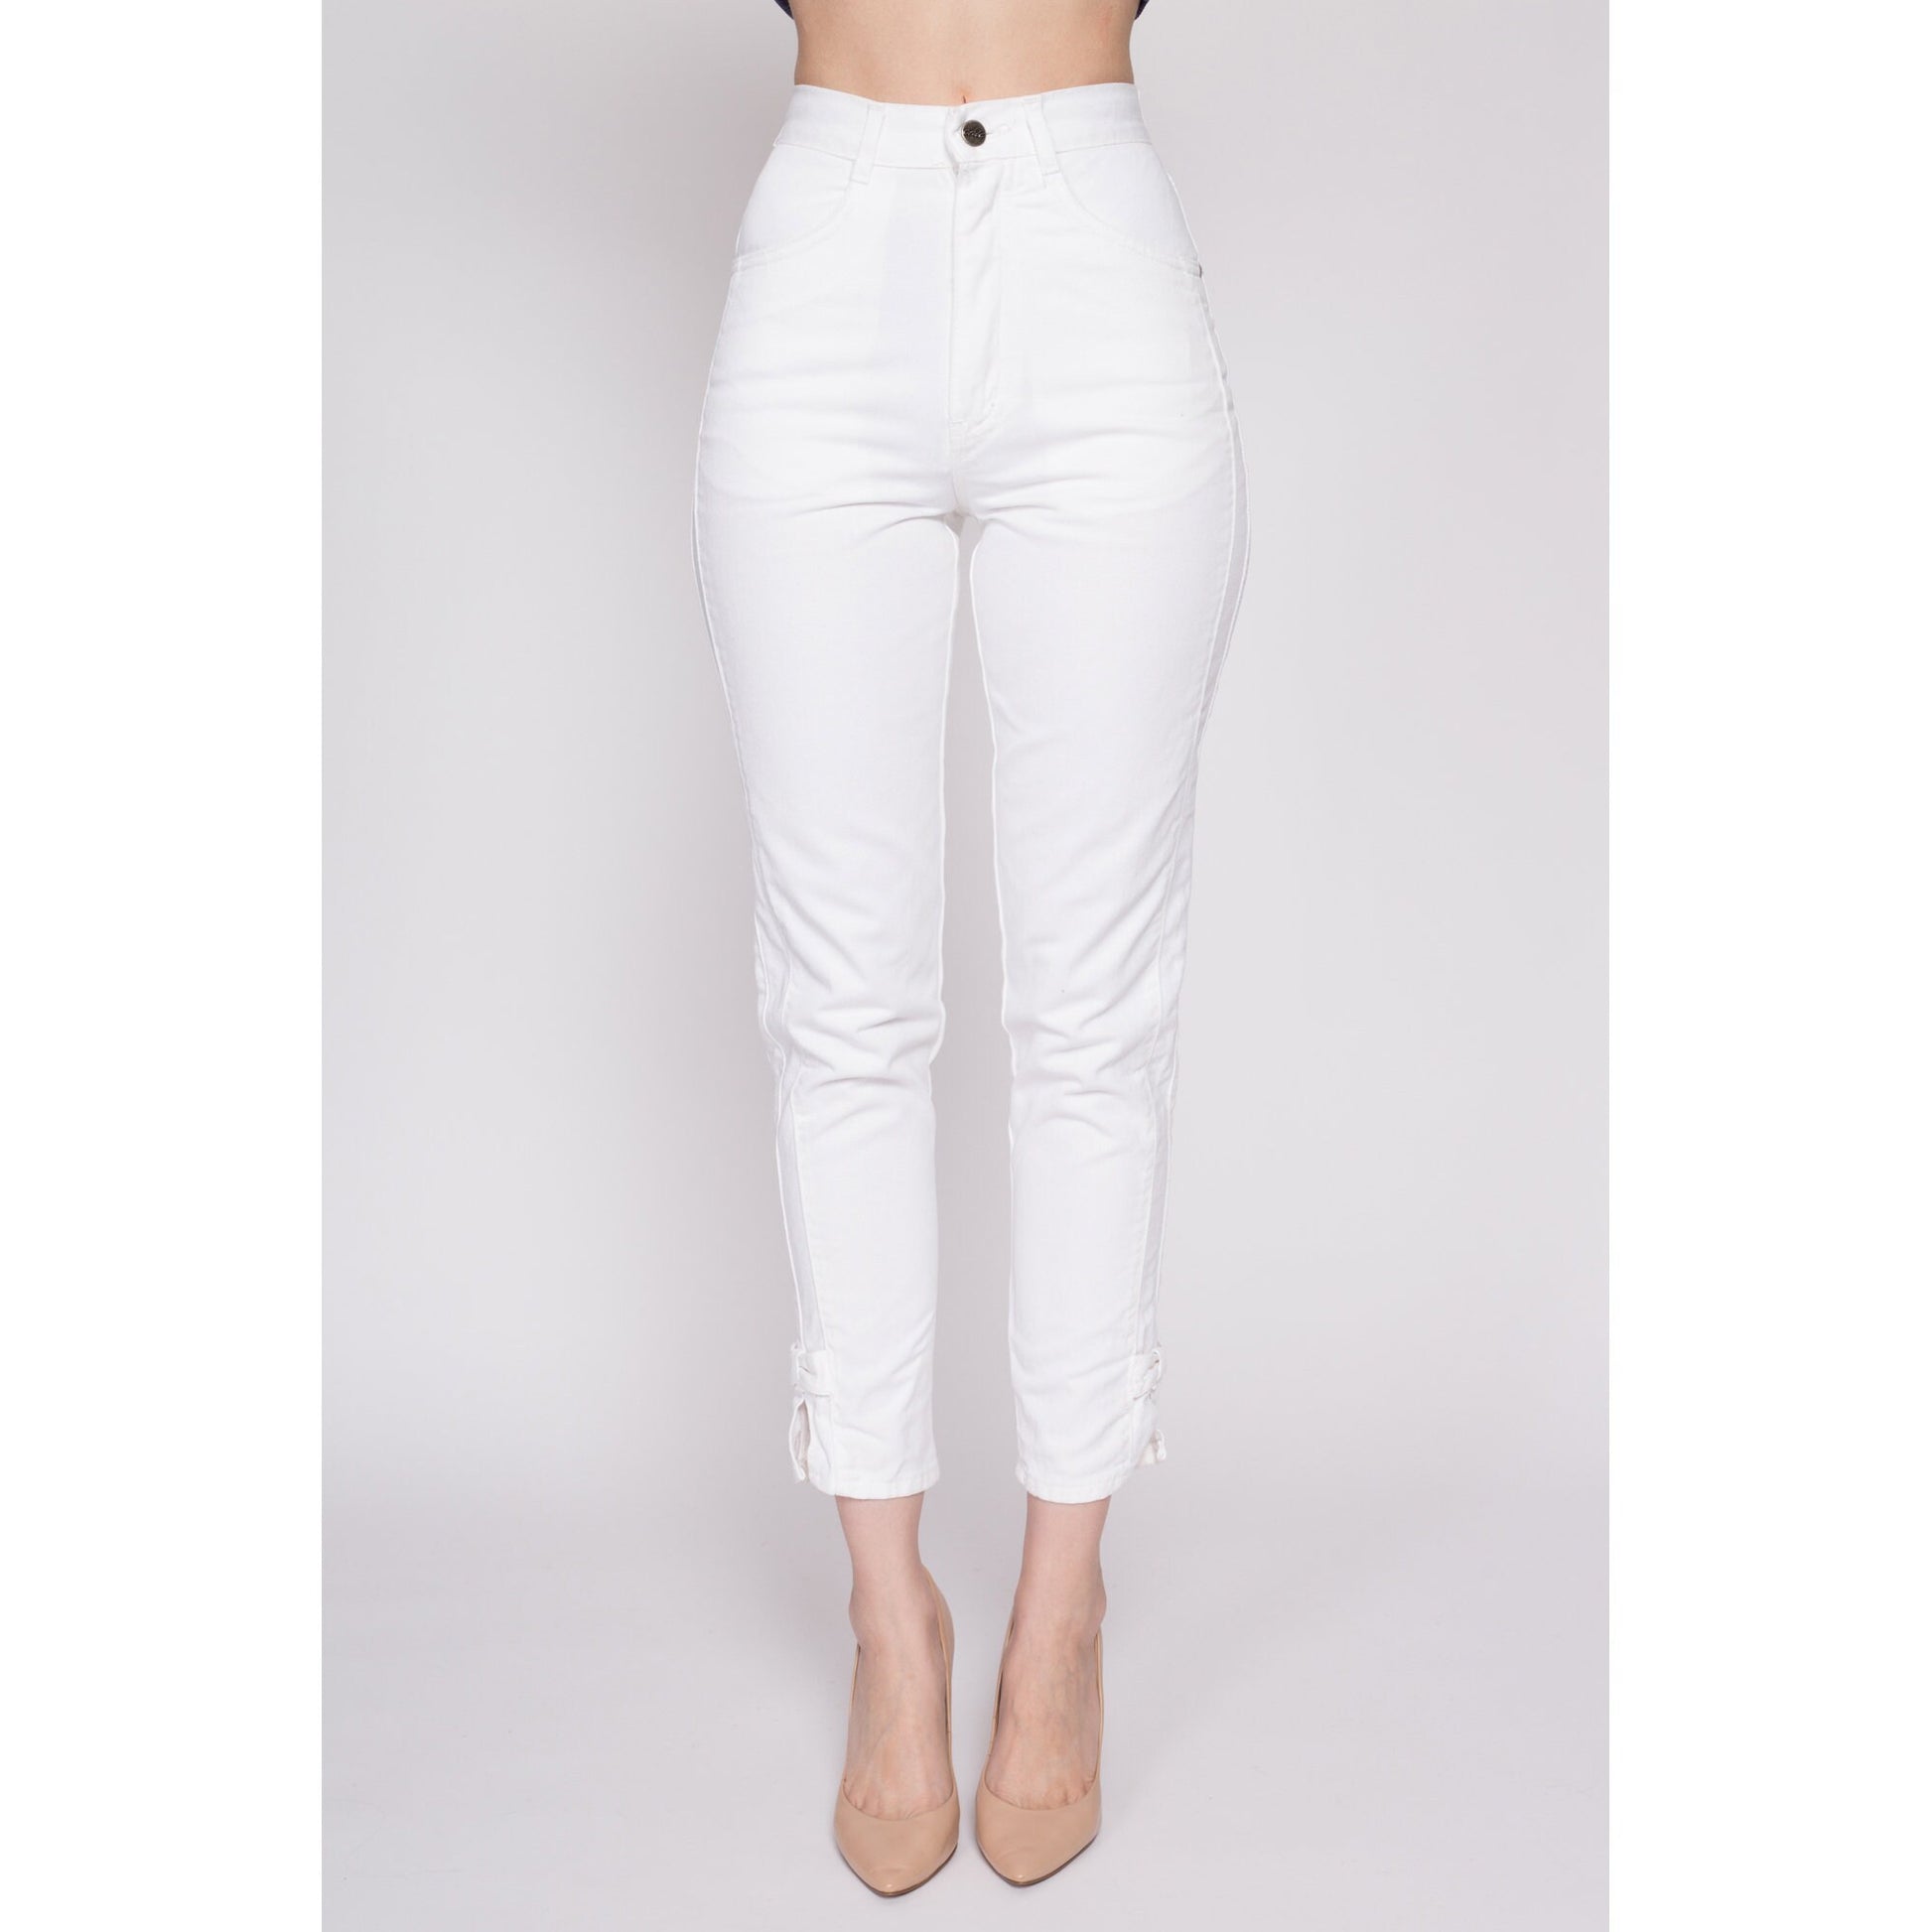 XS 80s Chic White Ankle Bow Skinny Jeans 24" | Vintage Denim High Waisted Slim Jeans